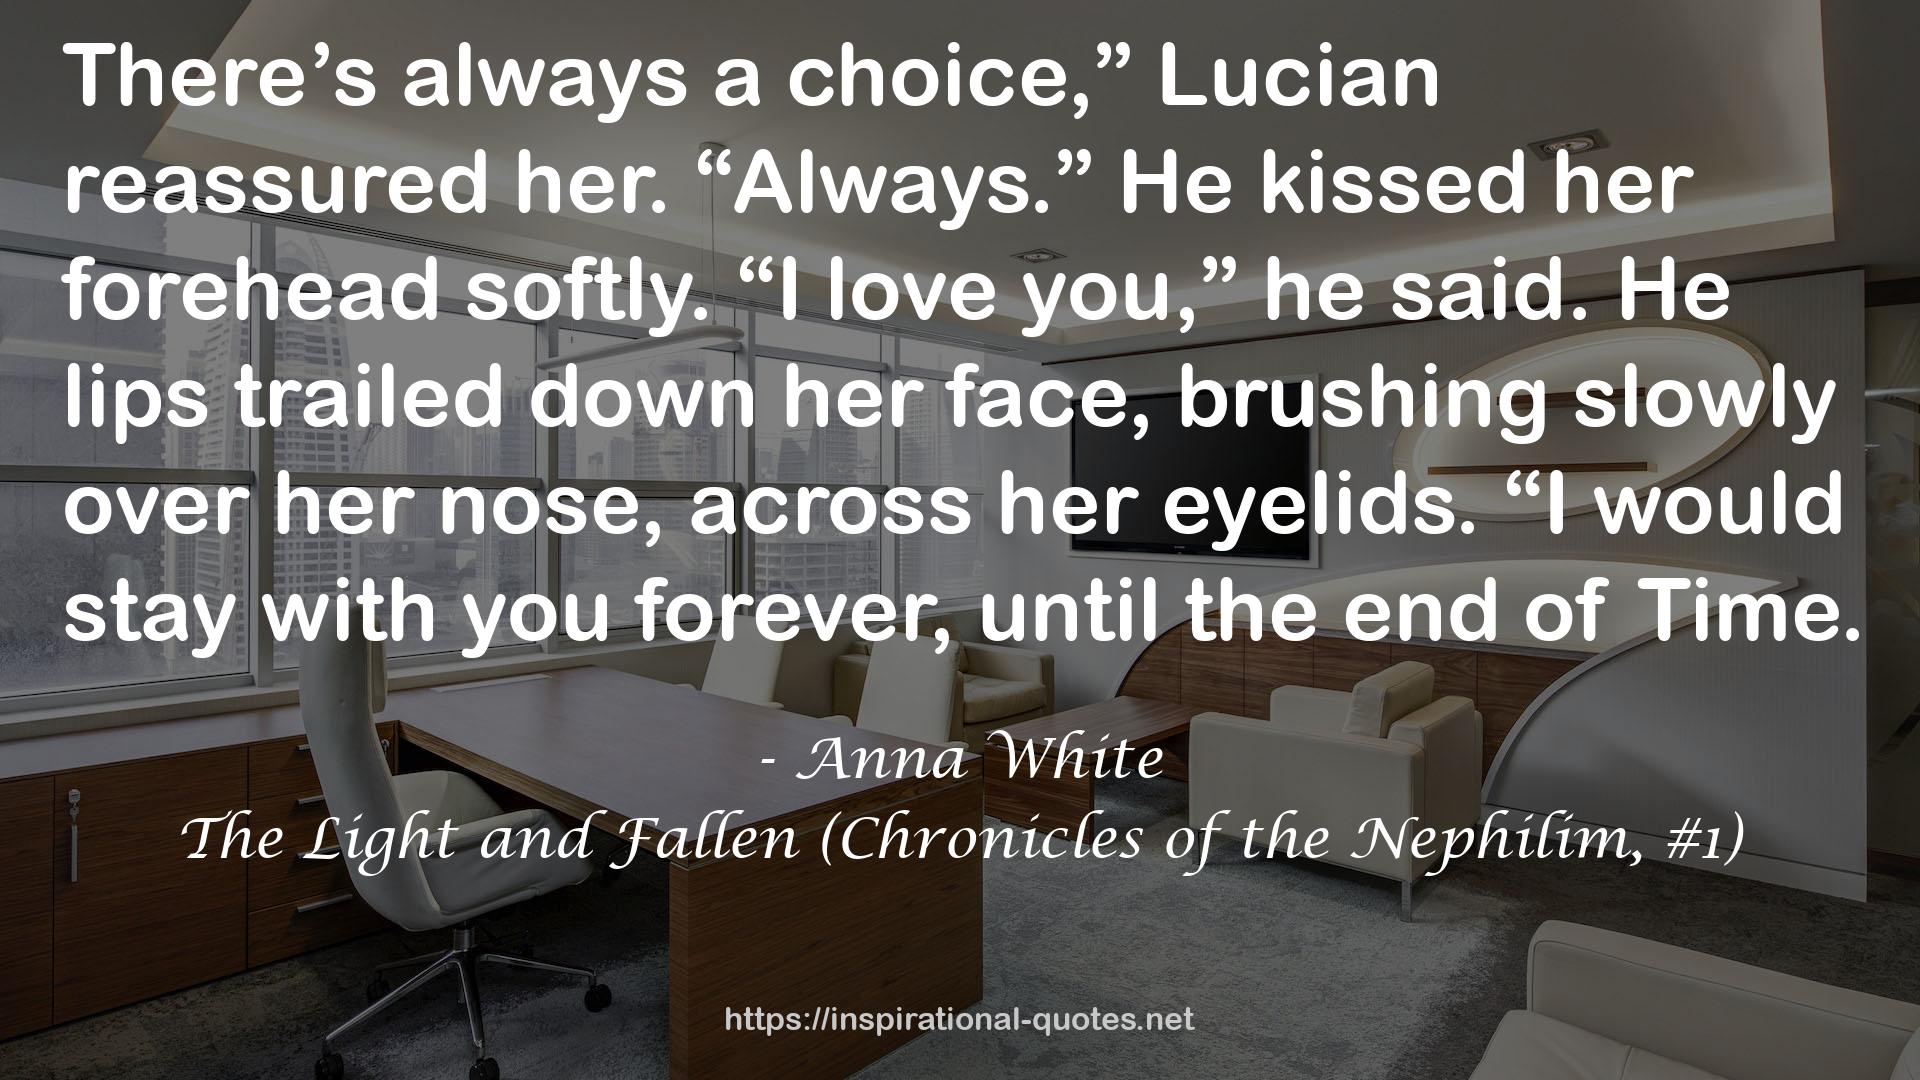 The Light and Fallen (Chronicles of the Nephilim, #1) QUOTES